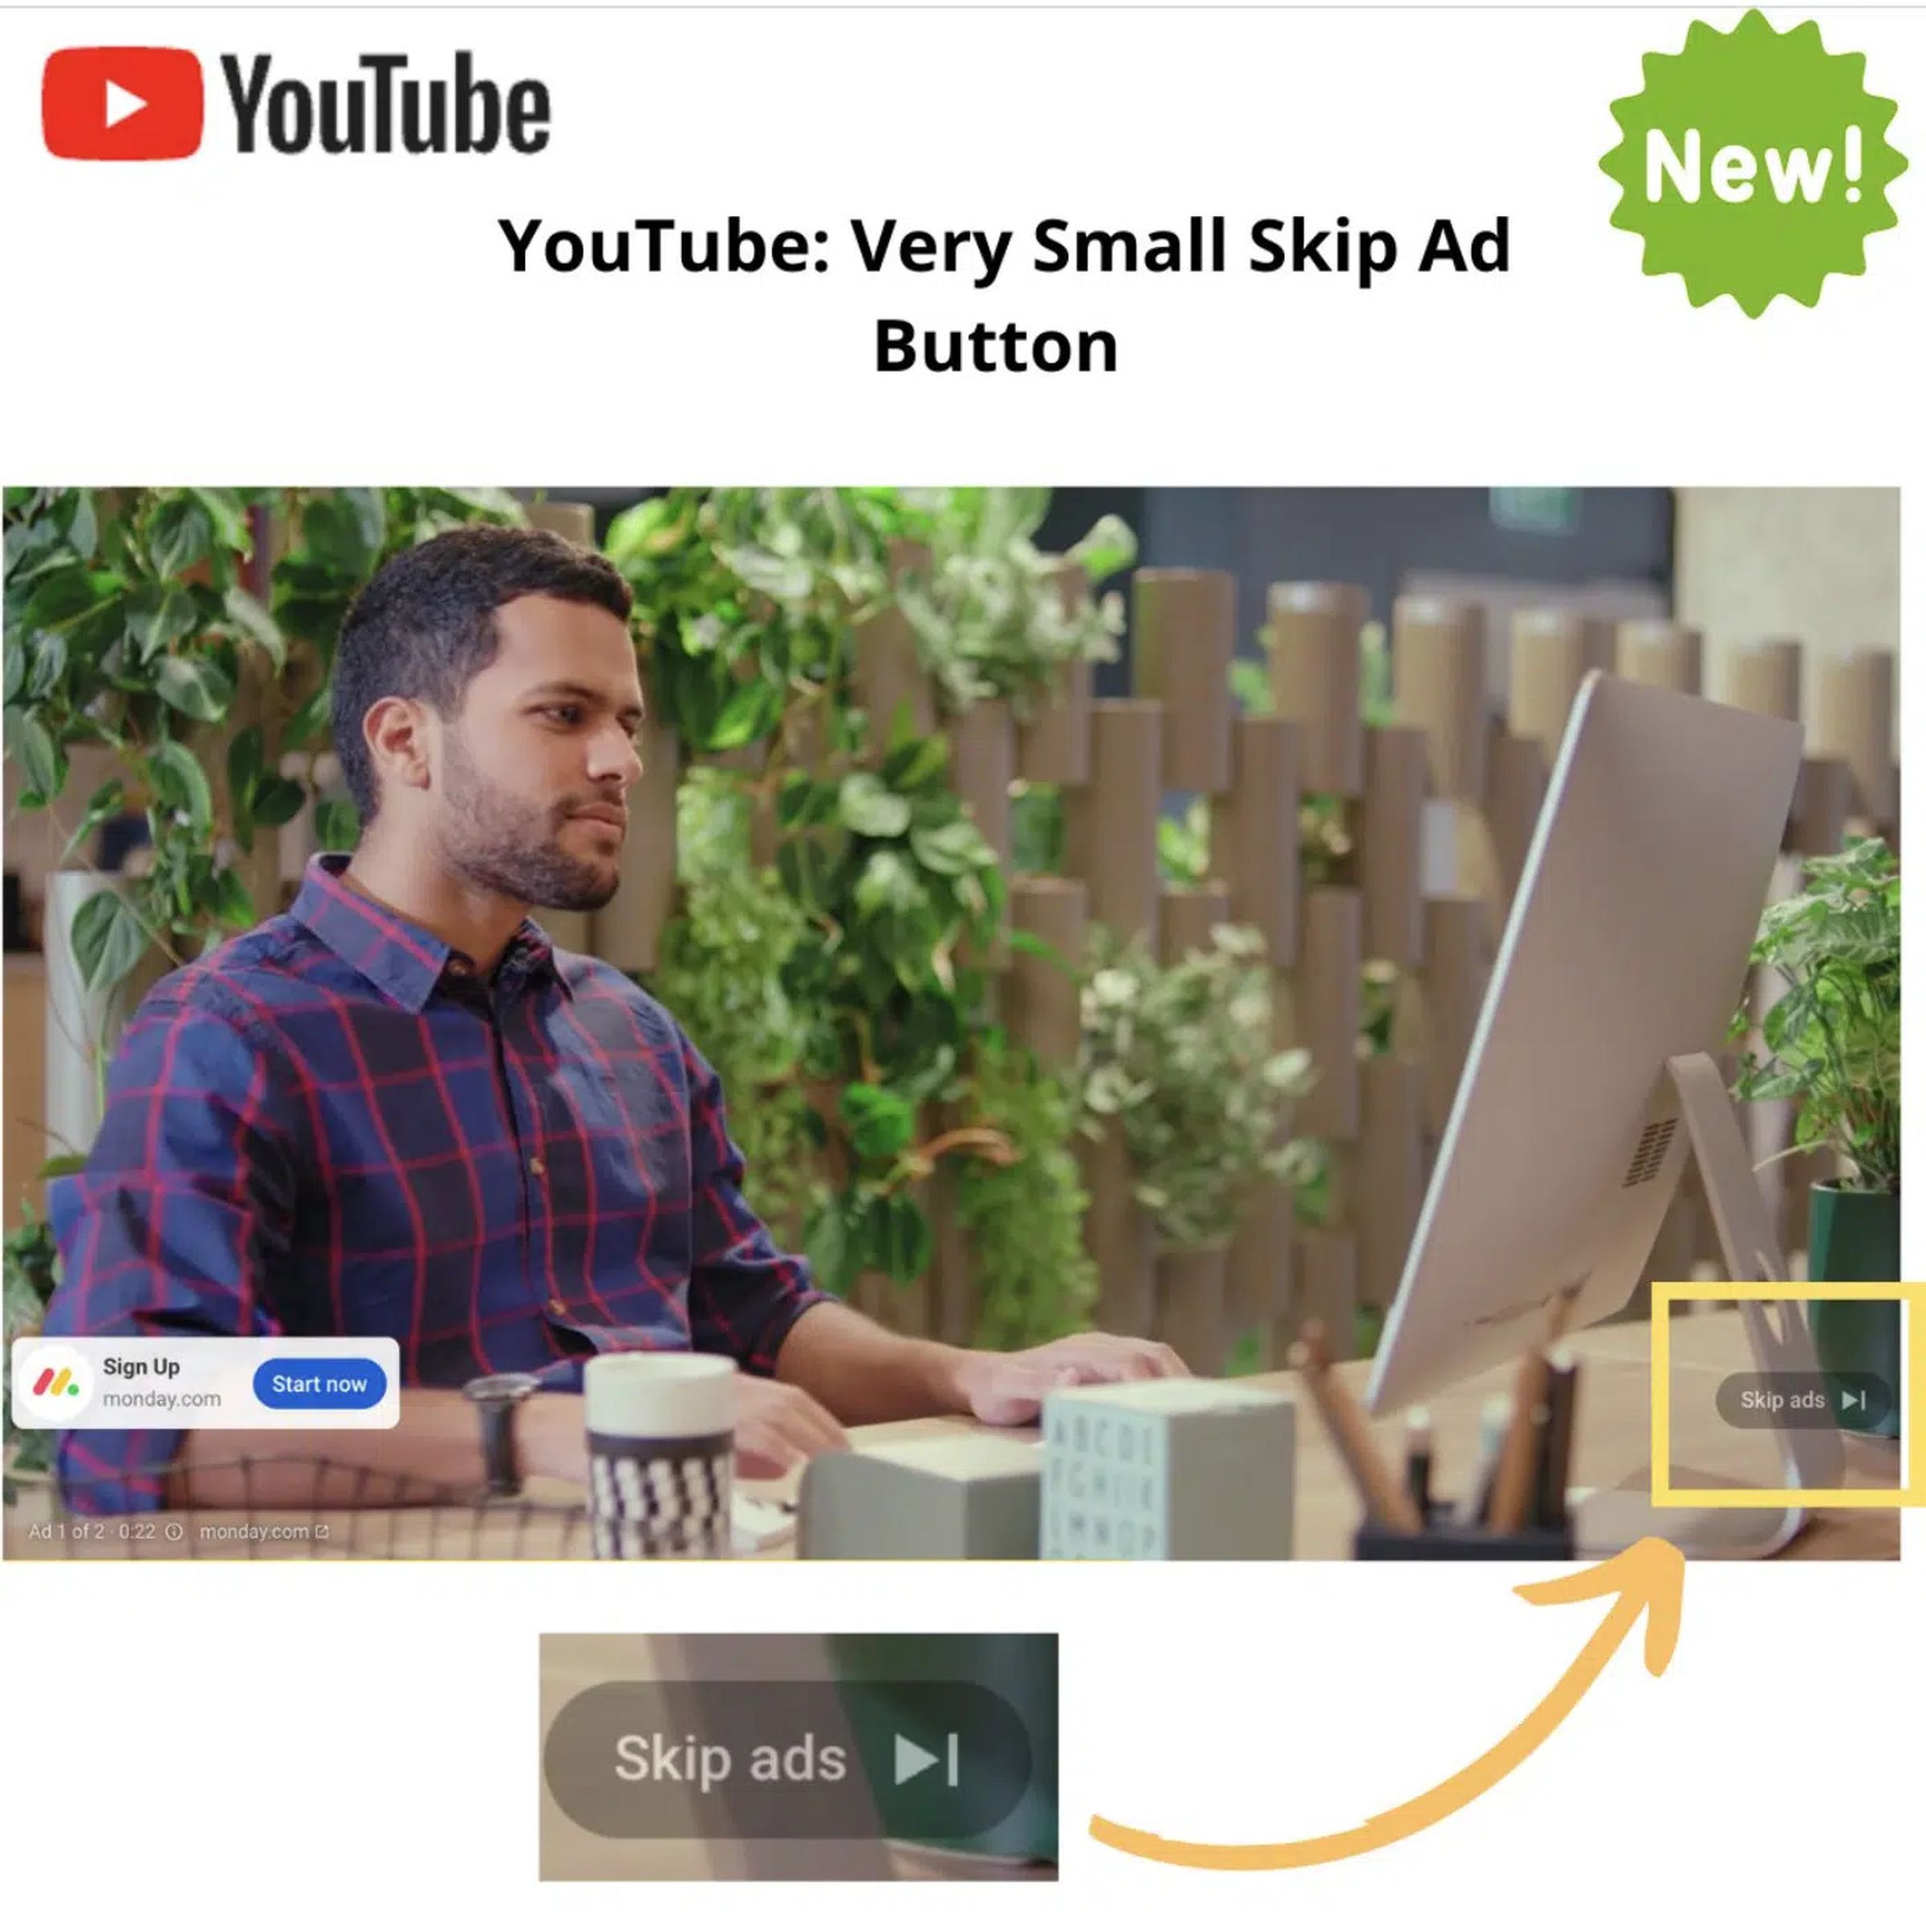 YouTube’s new “Skip ads” button is now in testing.